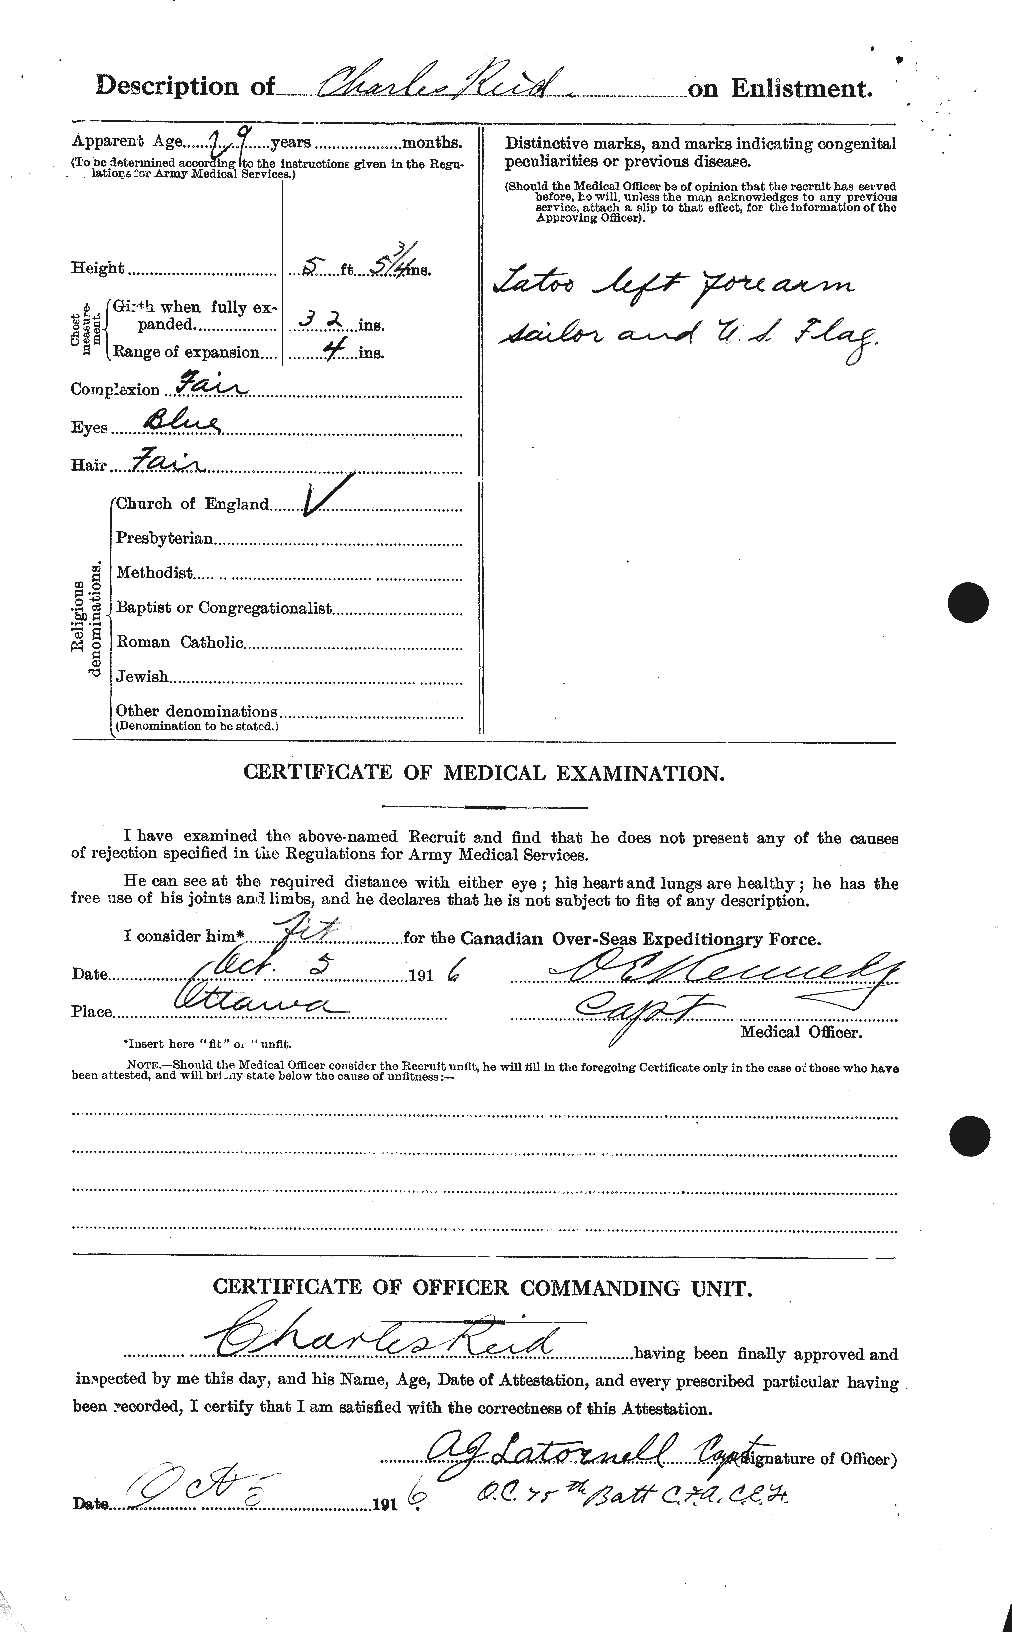 Personnel Records of the First World War - CEF 597873b